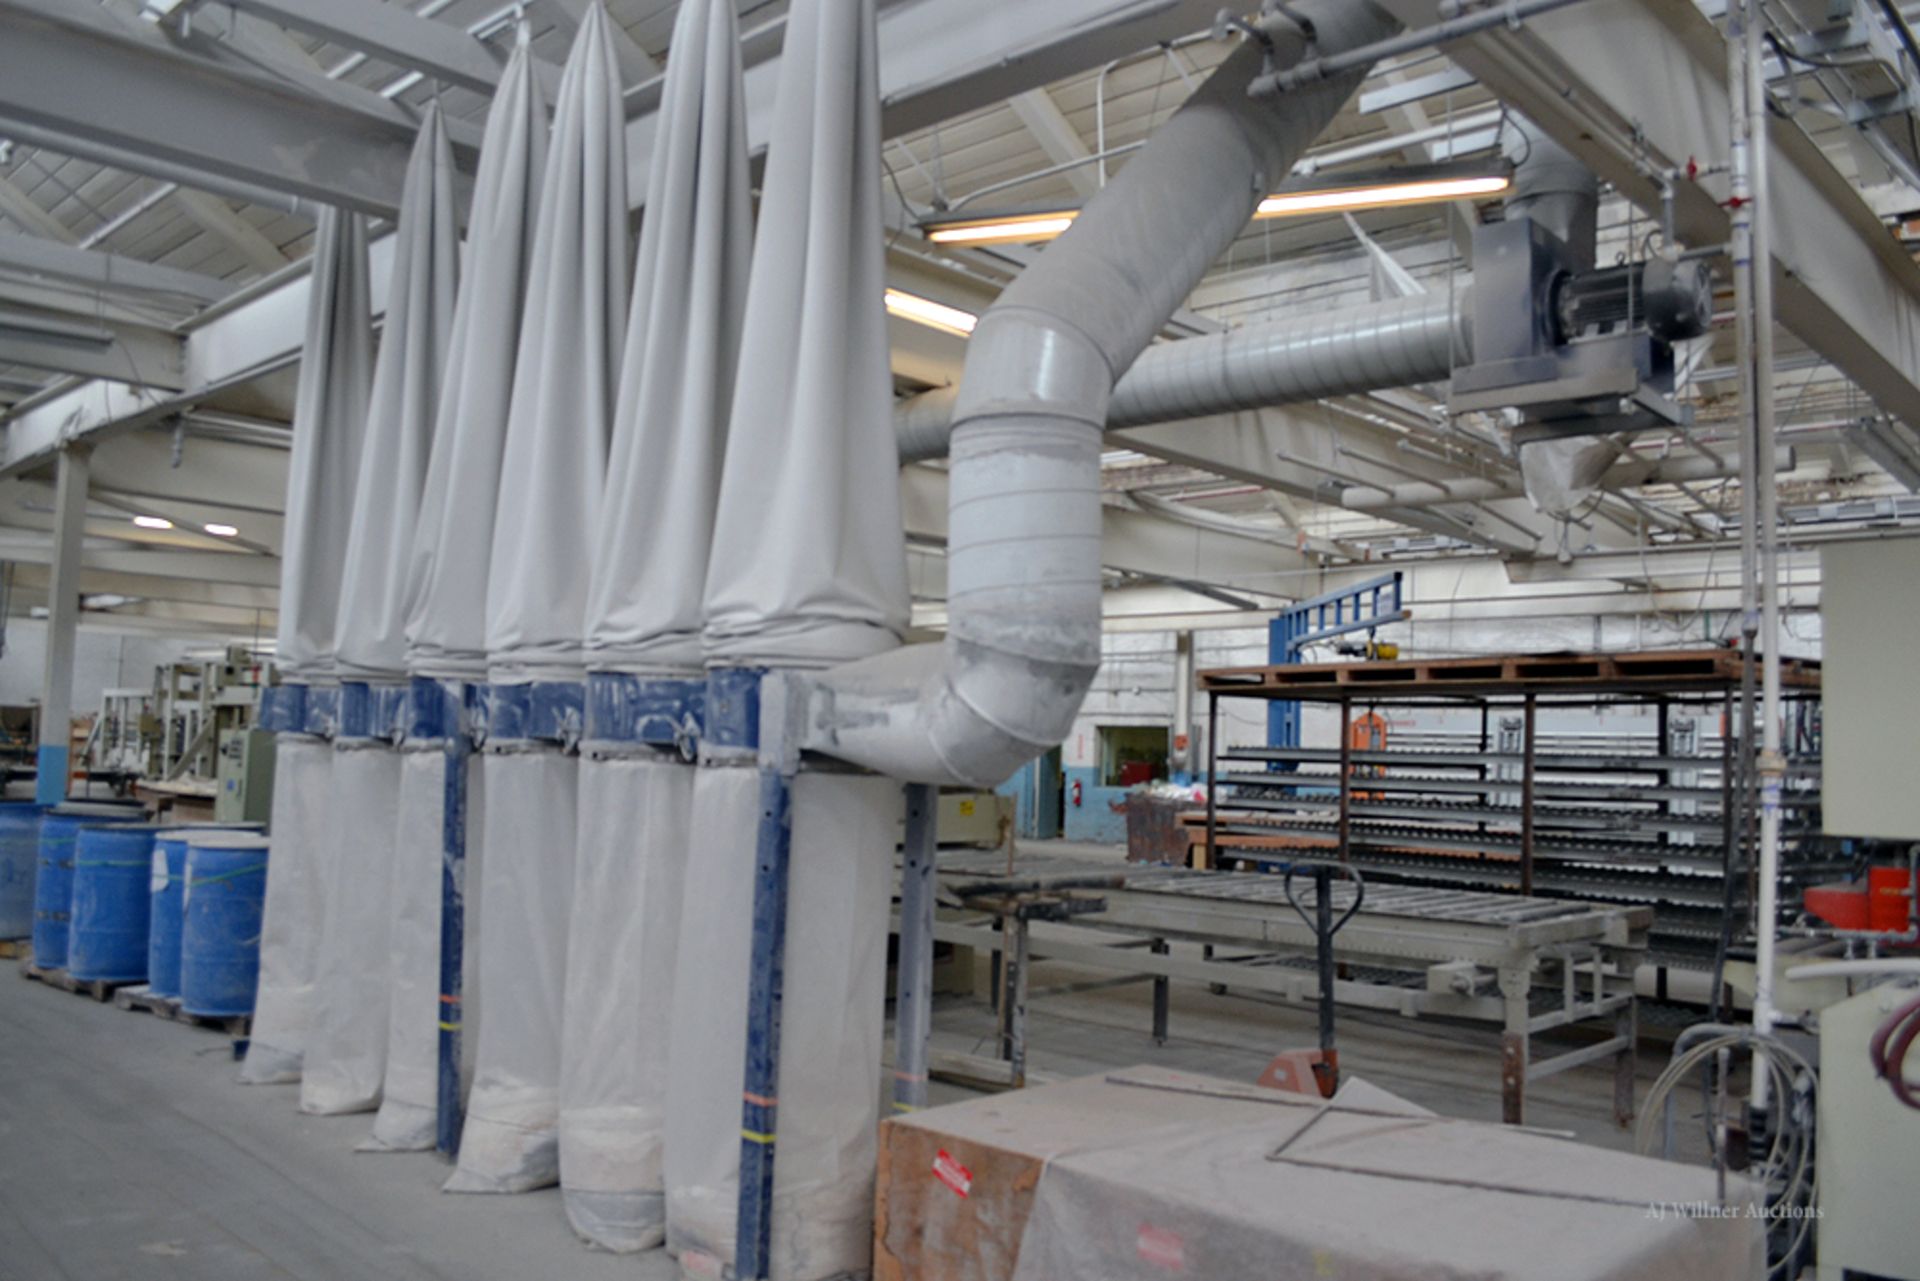 6-Bag Dust Collection System w/ Ceiling Mounted Motor & Duct Work